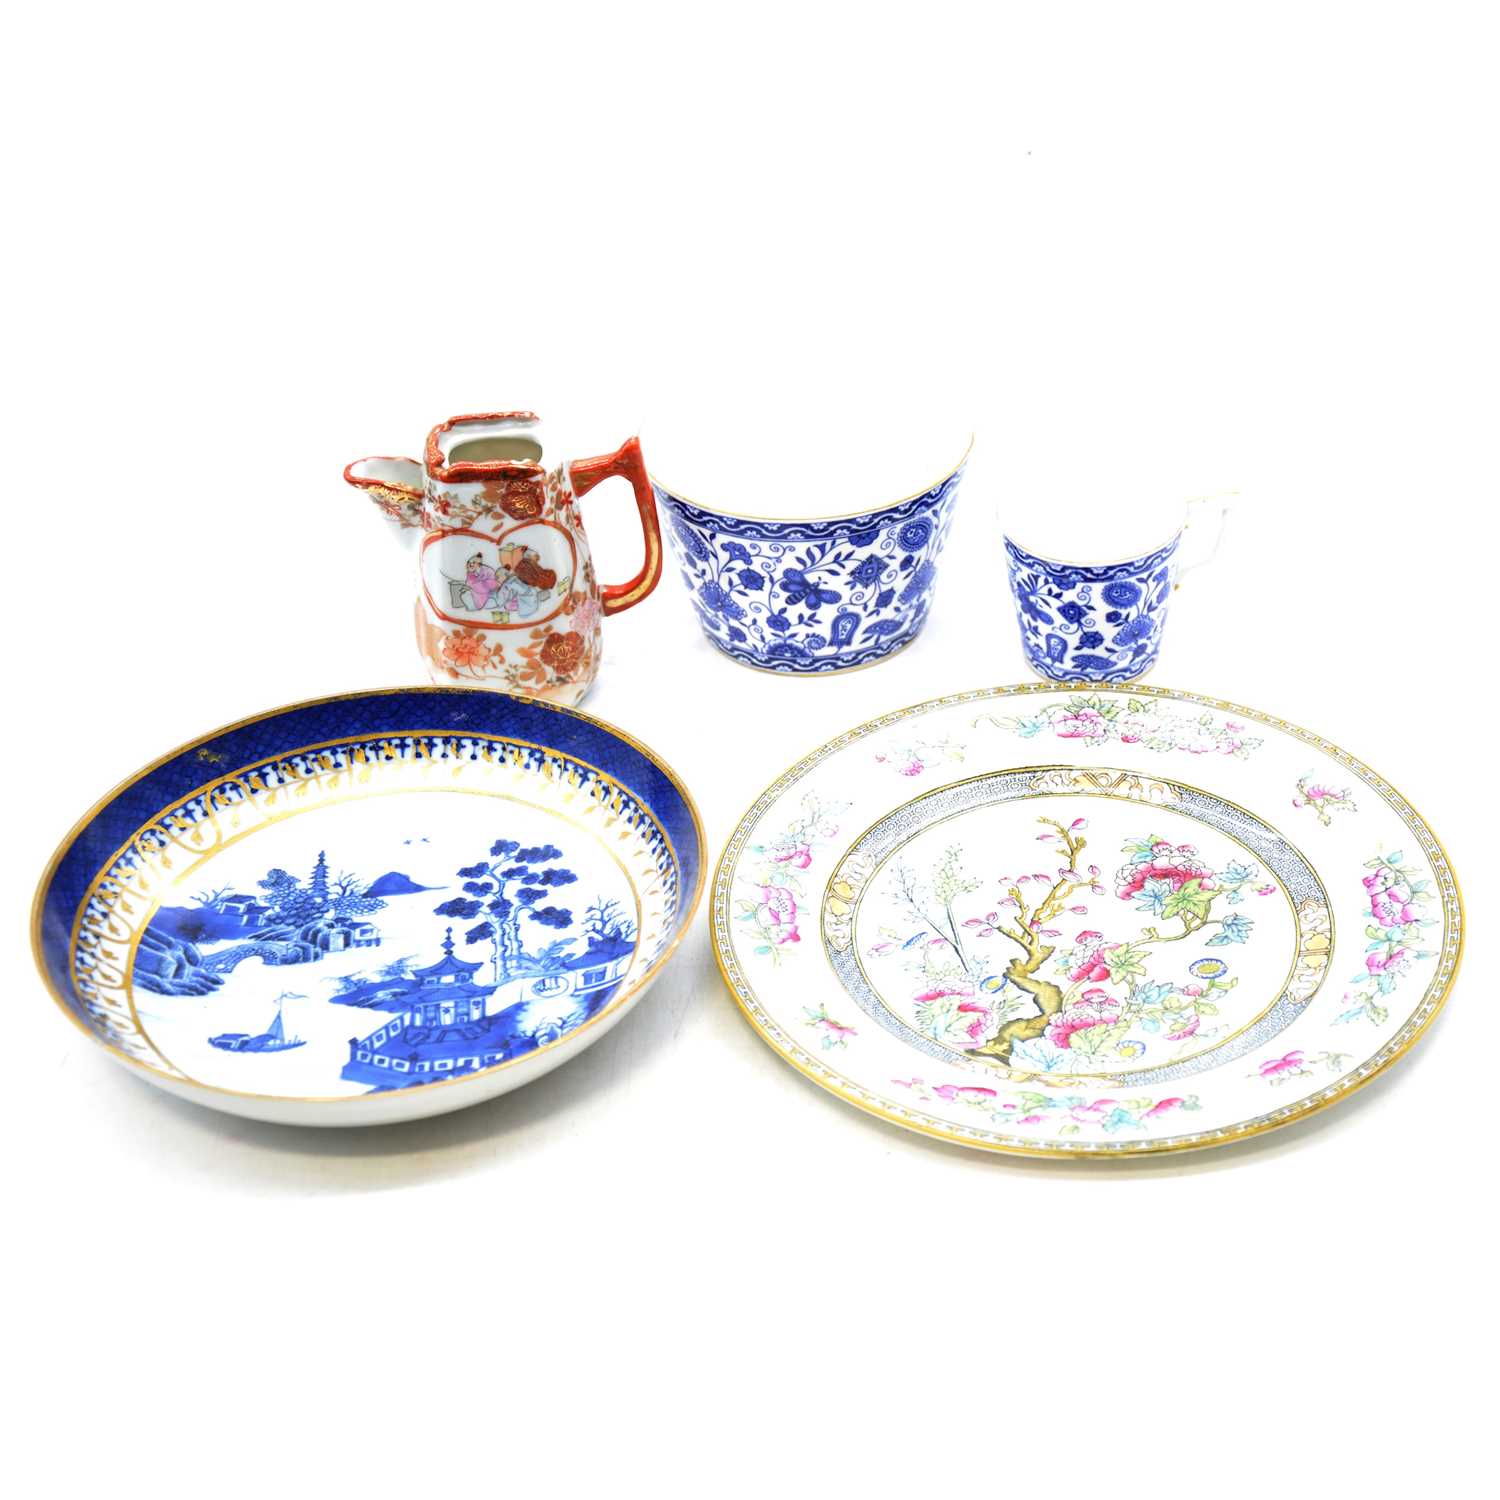 Lot 53 - Royal Crown Derby Wilmot pattern part coffee service, and other decorative ceramics